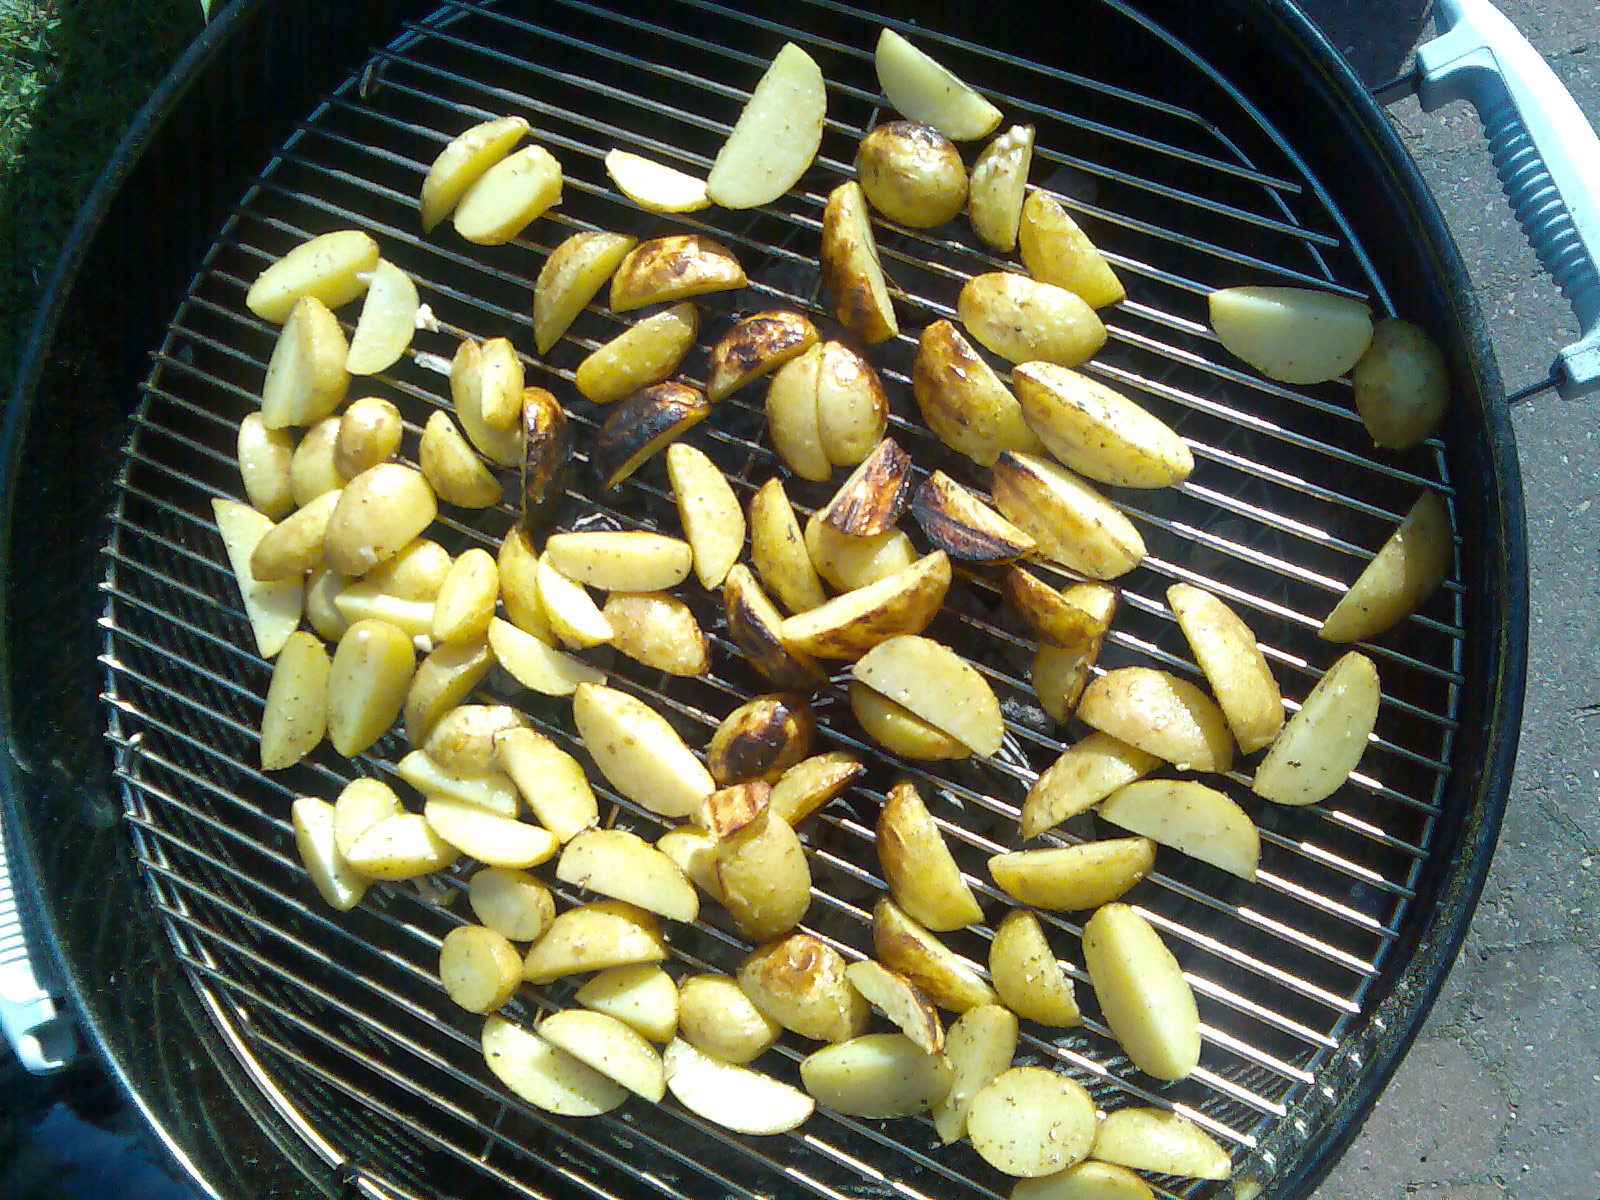 some potatoes on a grill grill outside